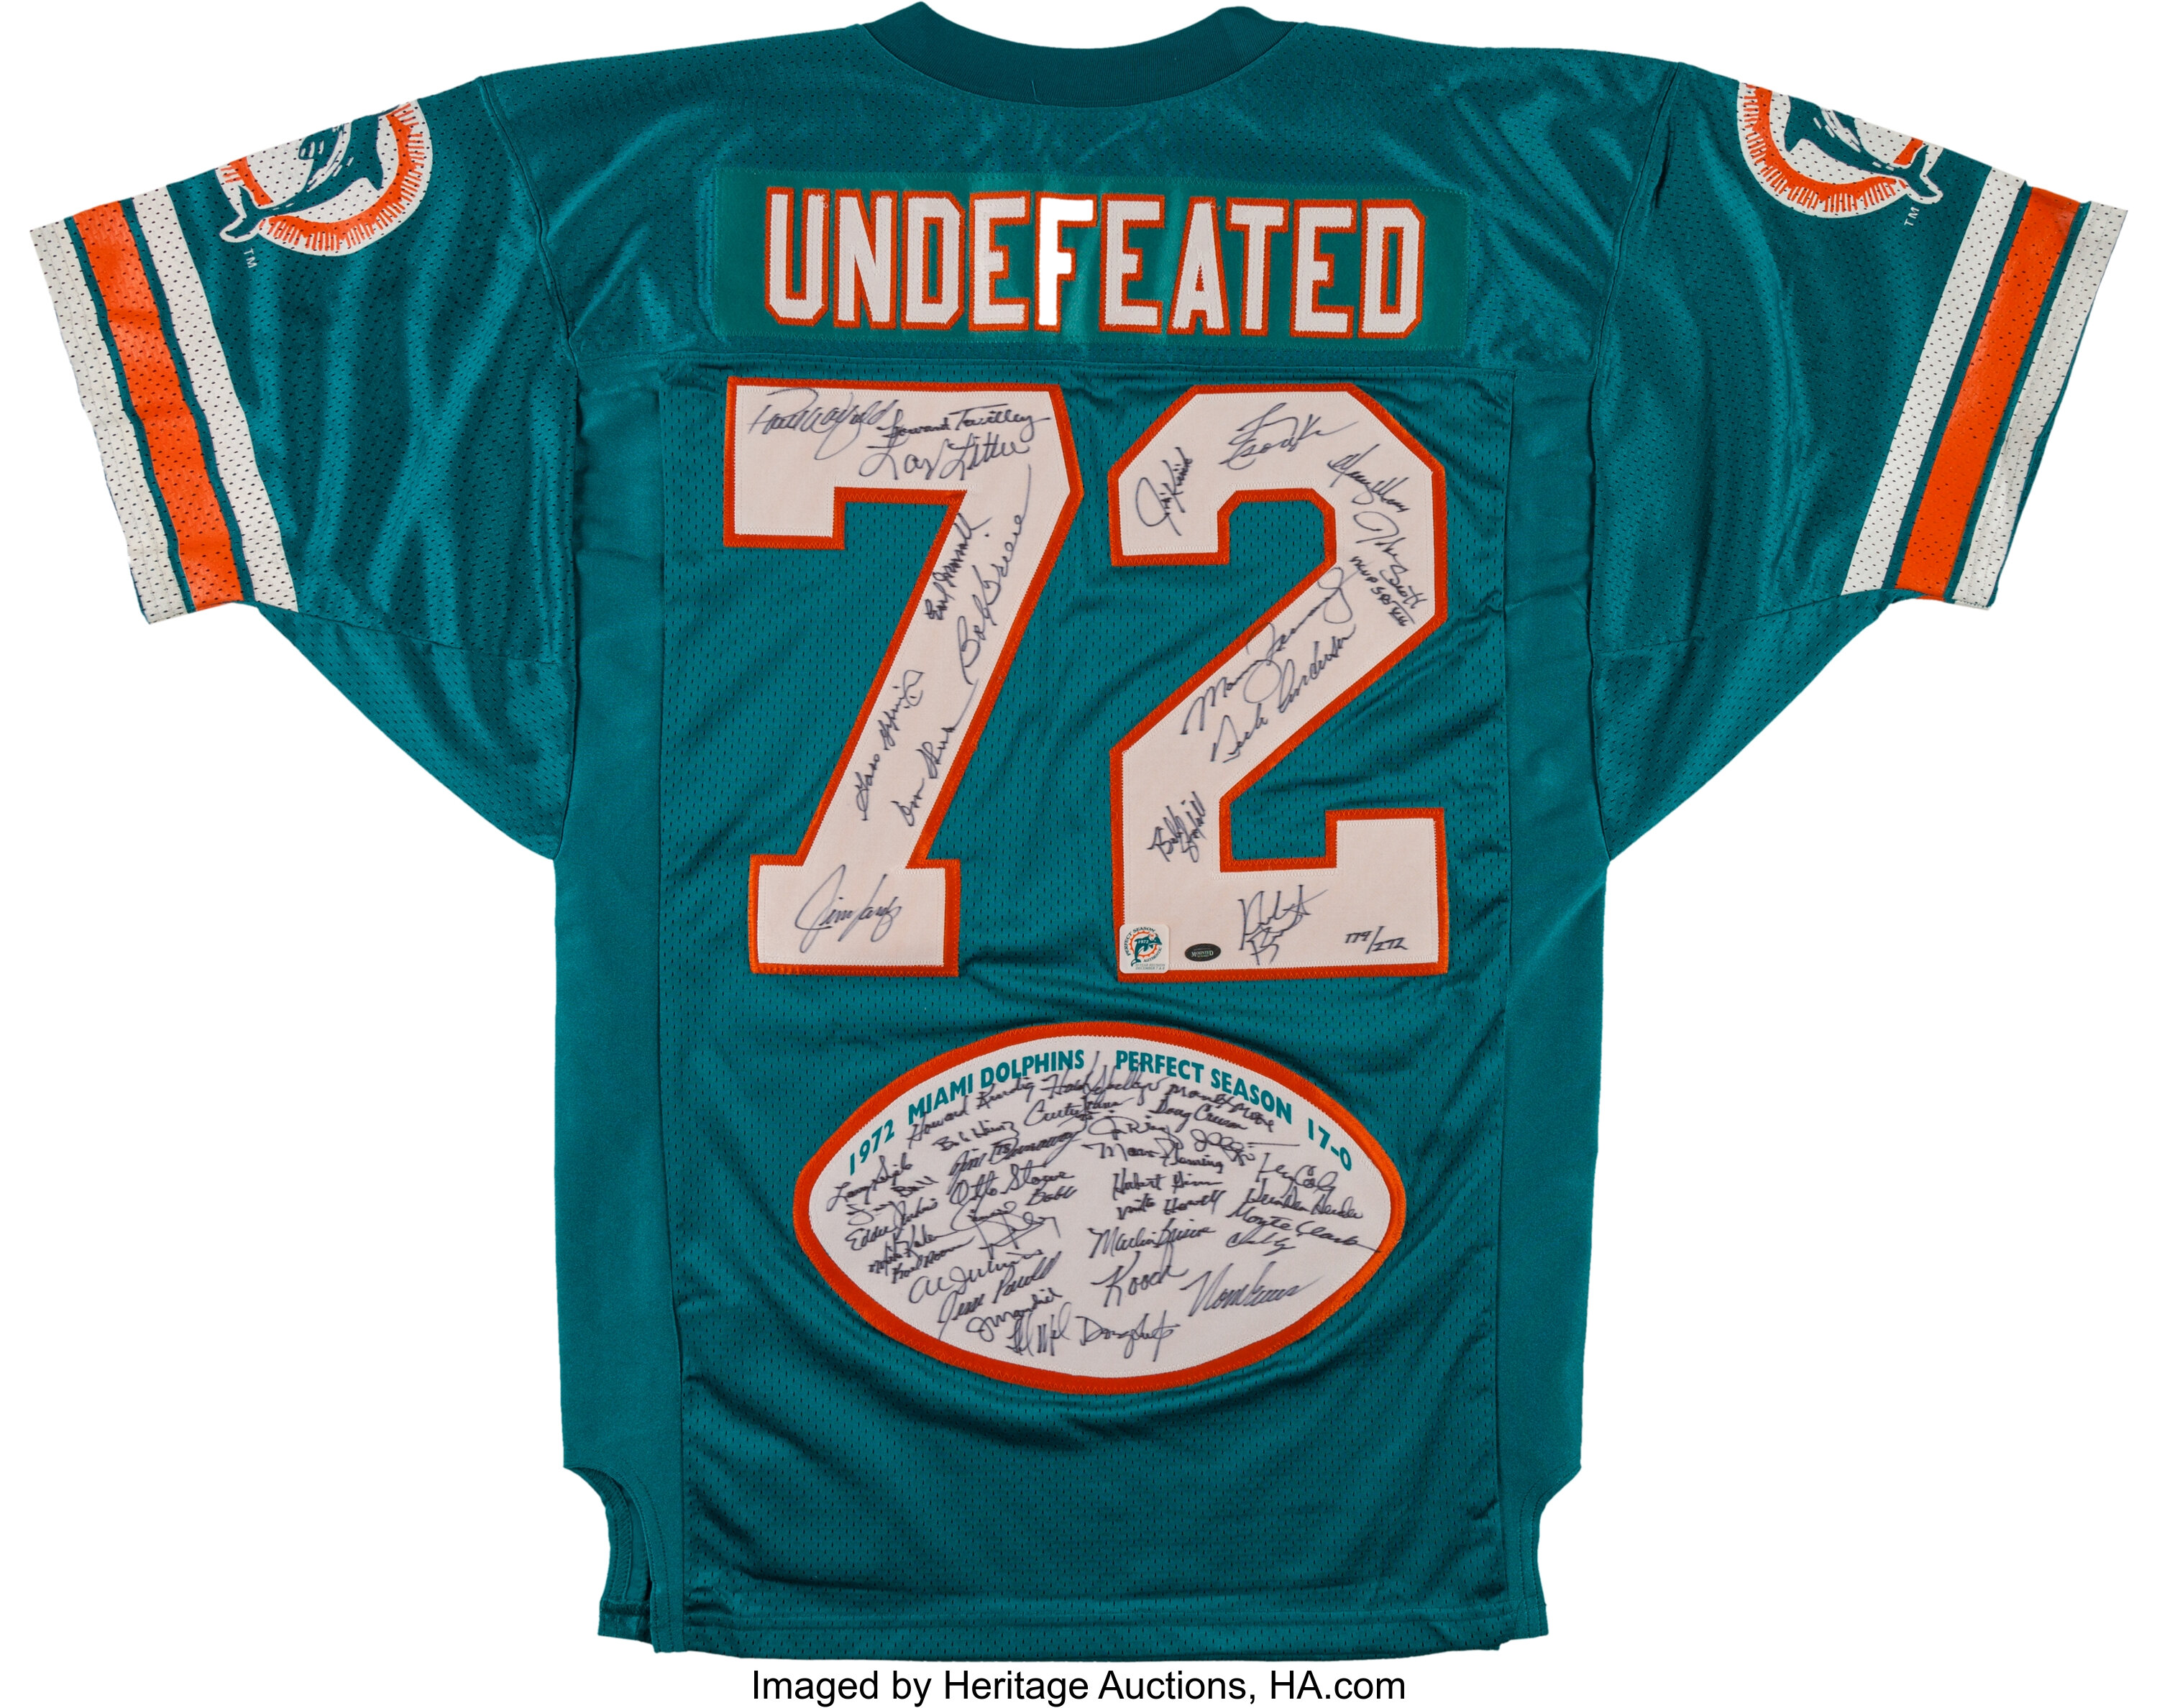 Miami dolphins undefeated 72 perfect season shirt - Guineashirt